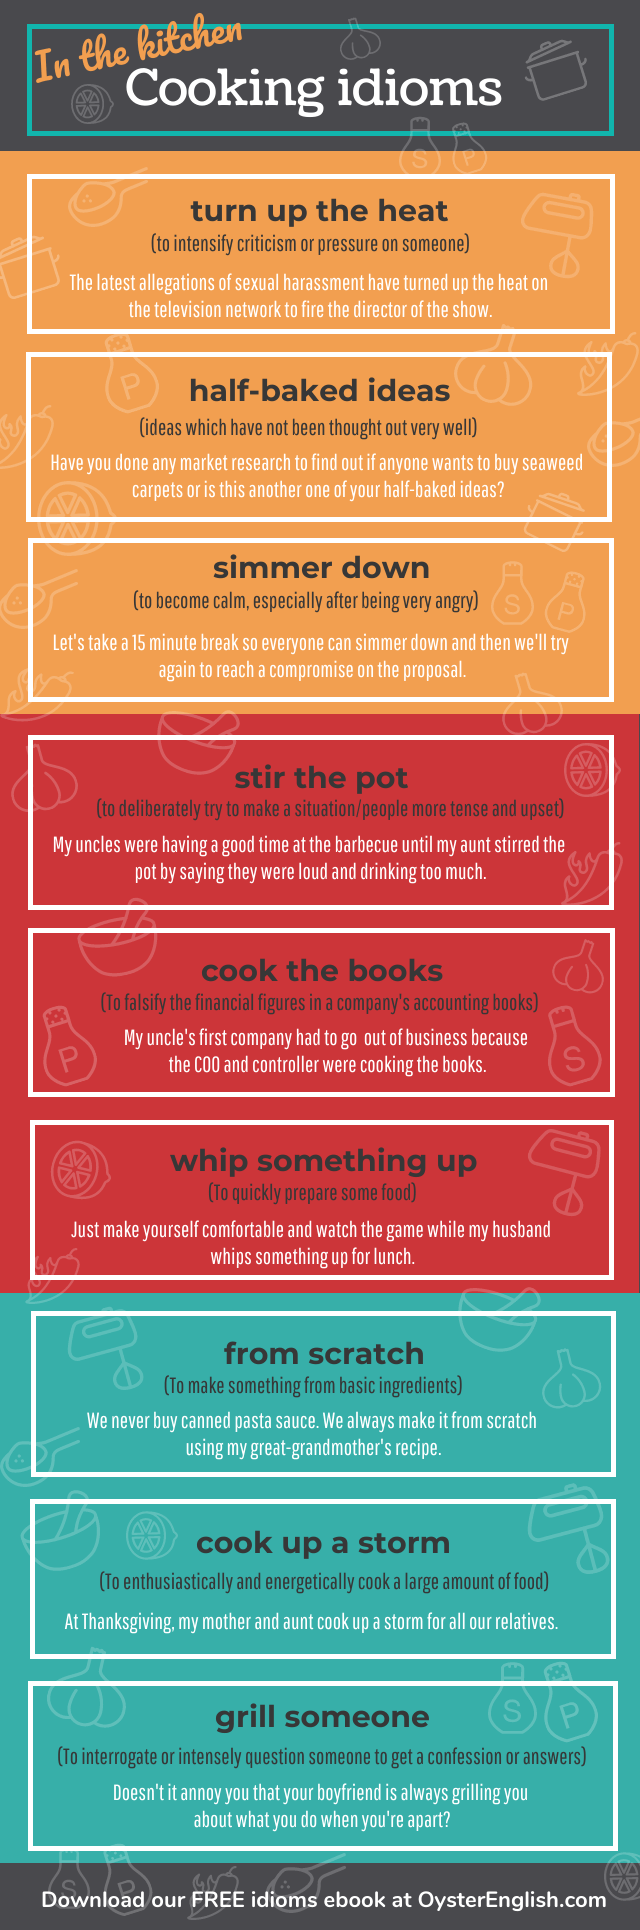 Infographic with 9 cooking idioms, including definitions and sentence examples, of the idioms featured on this web page.